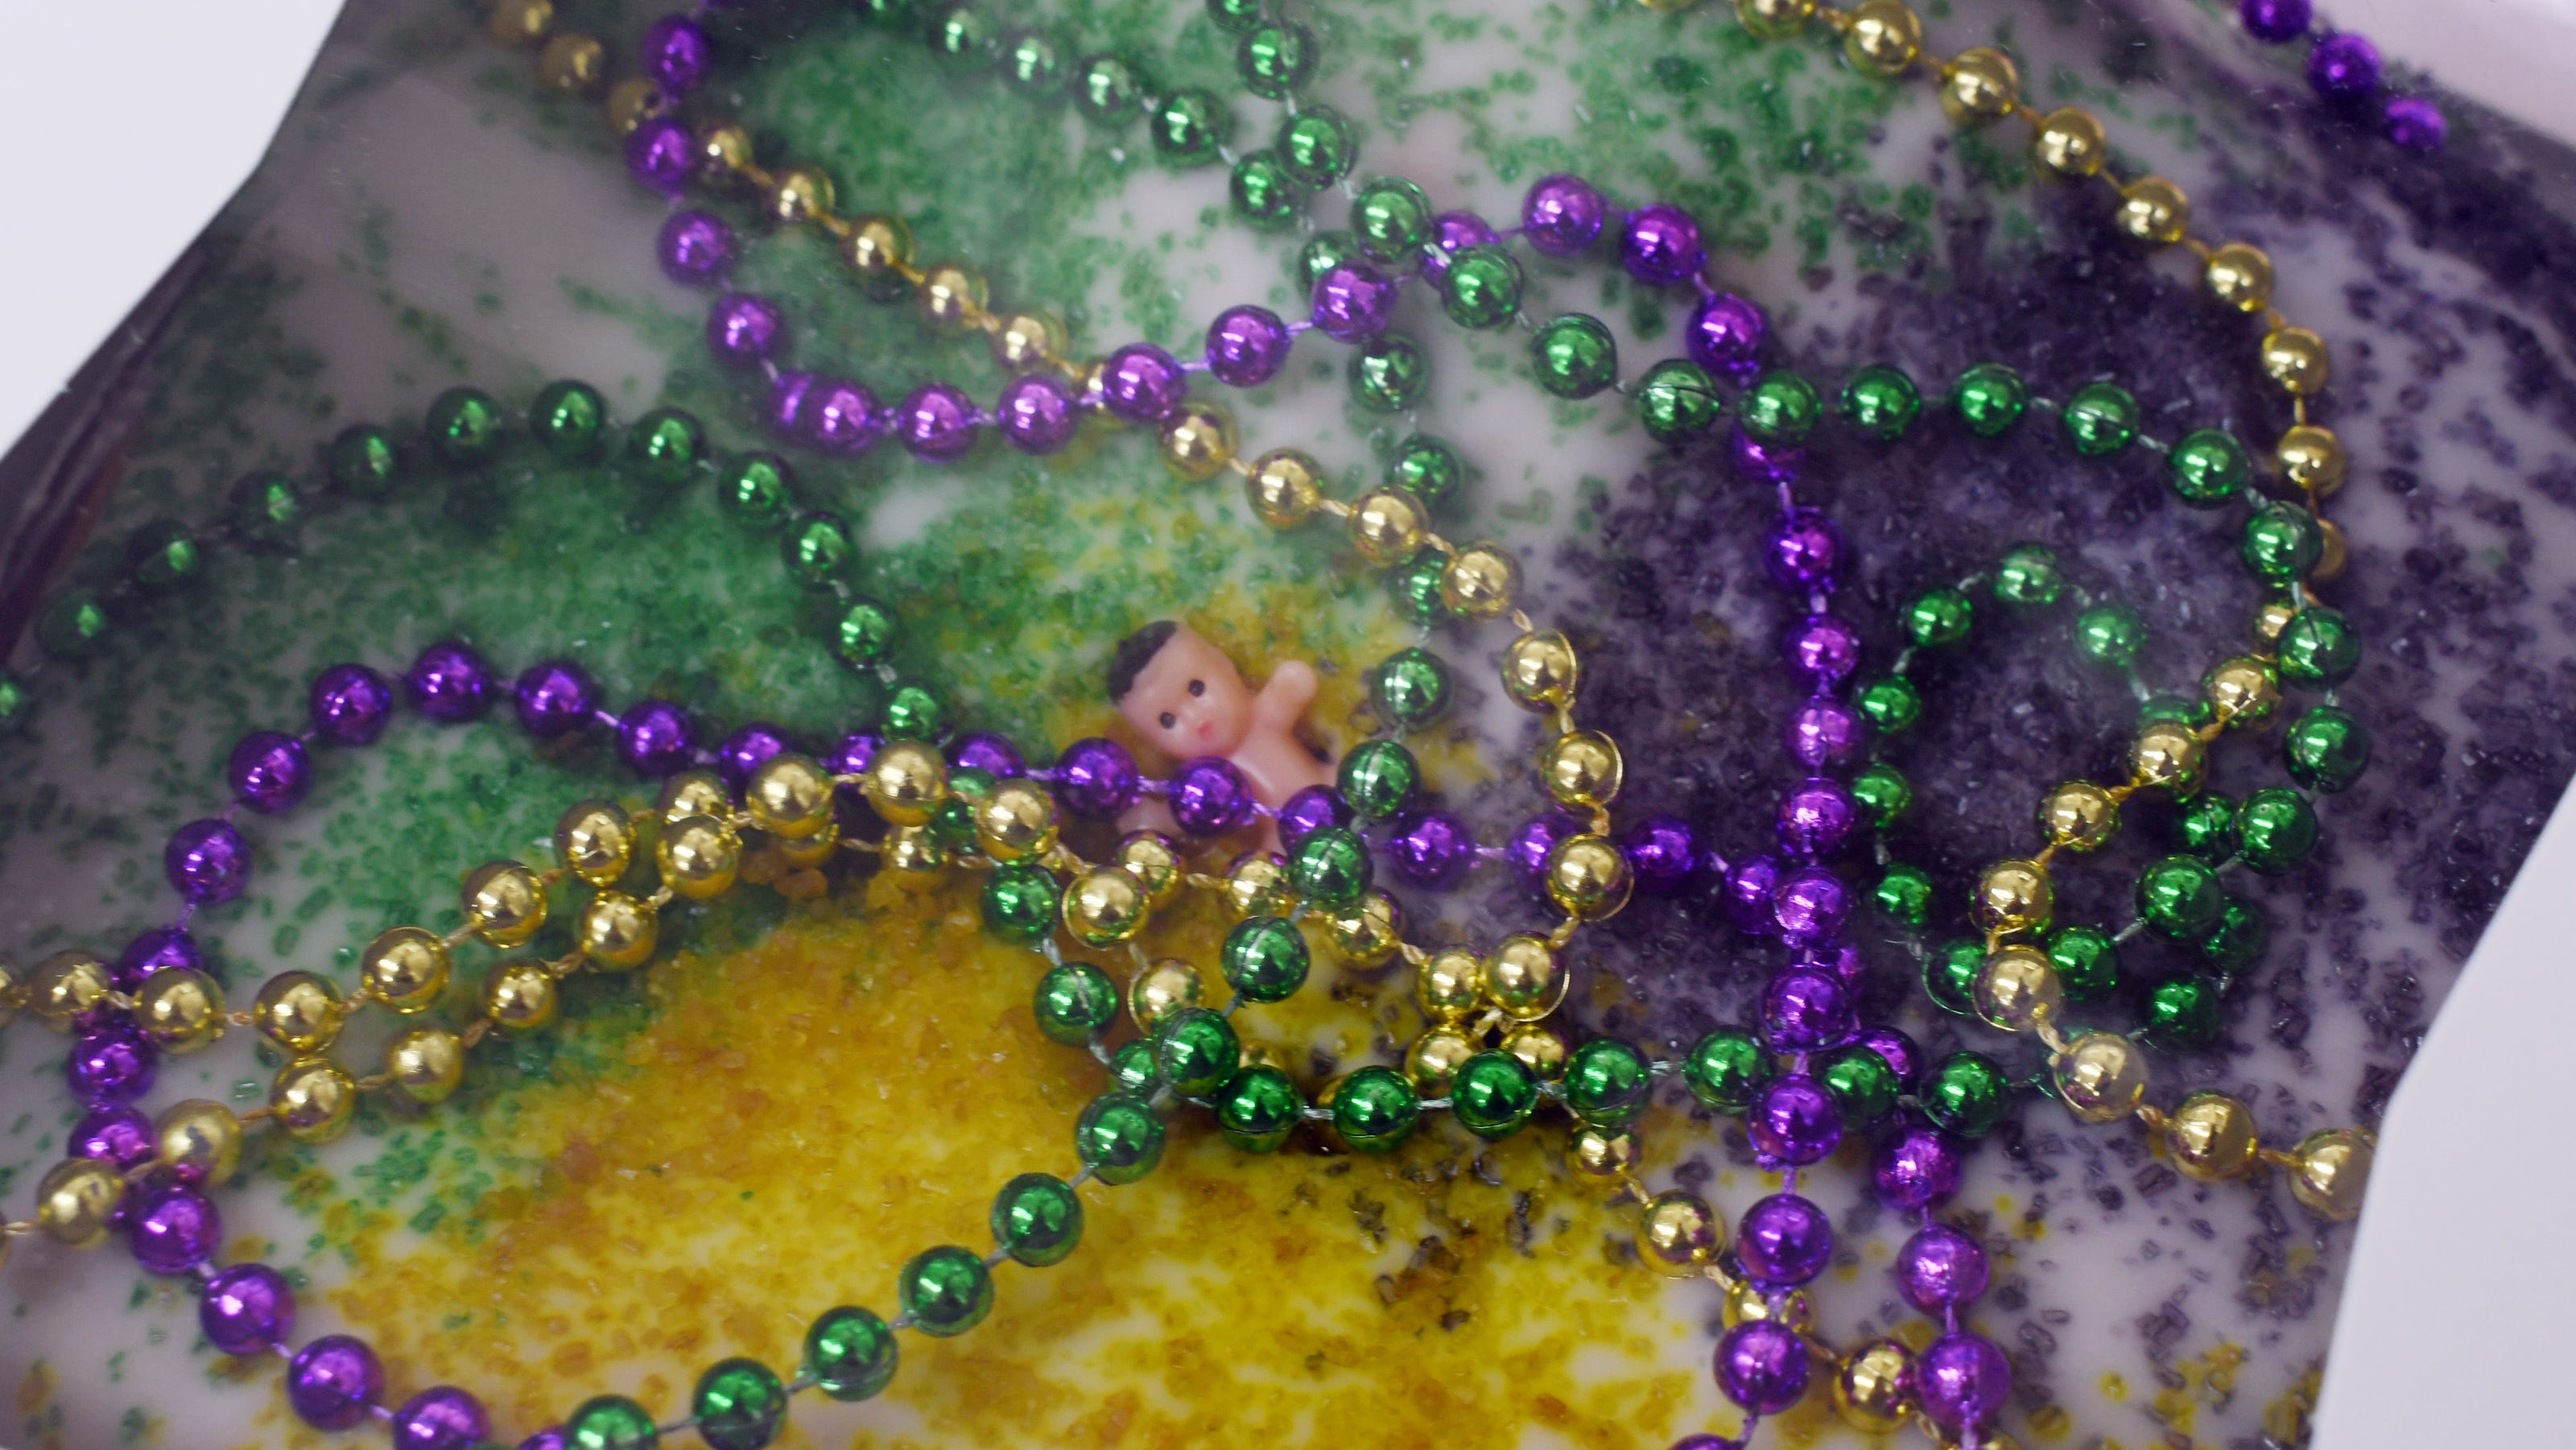 King Cake Festival among 5 things to do this weekend in Houma, Thibodaux